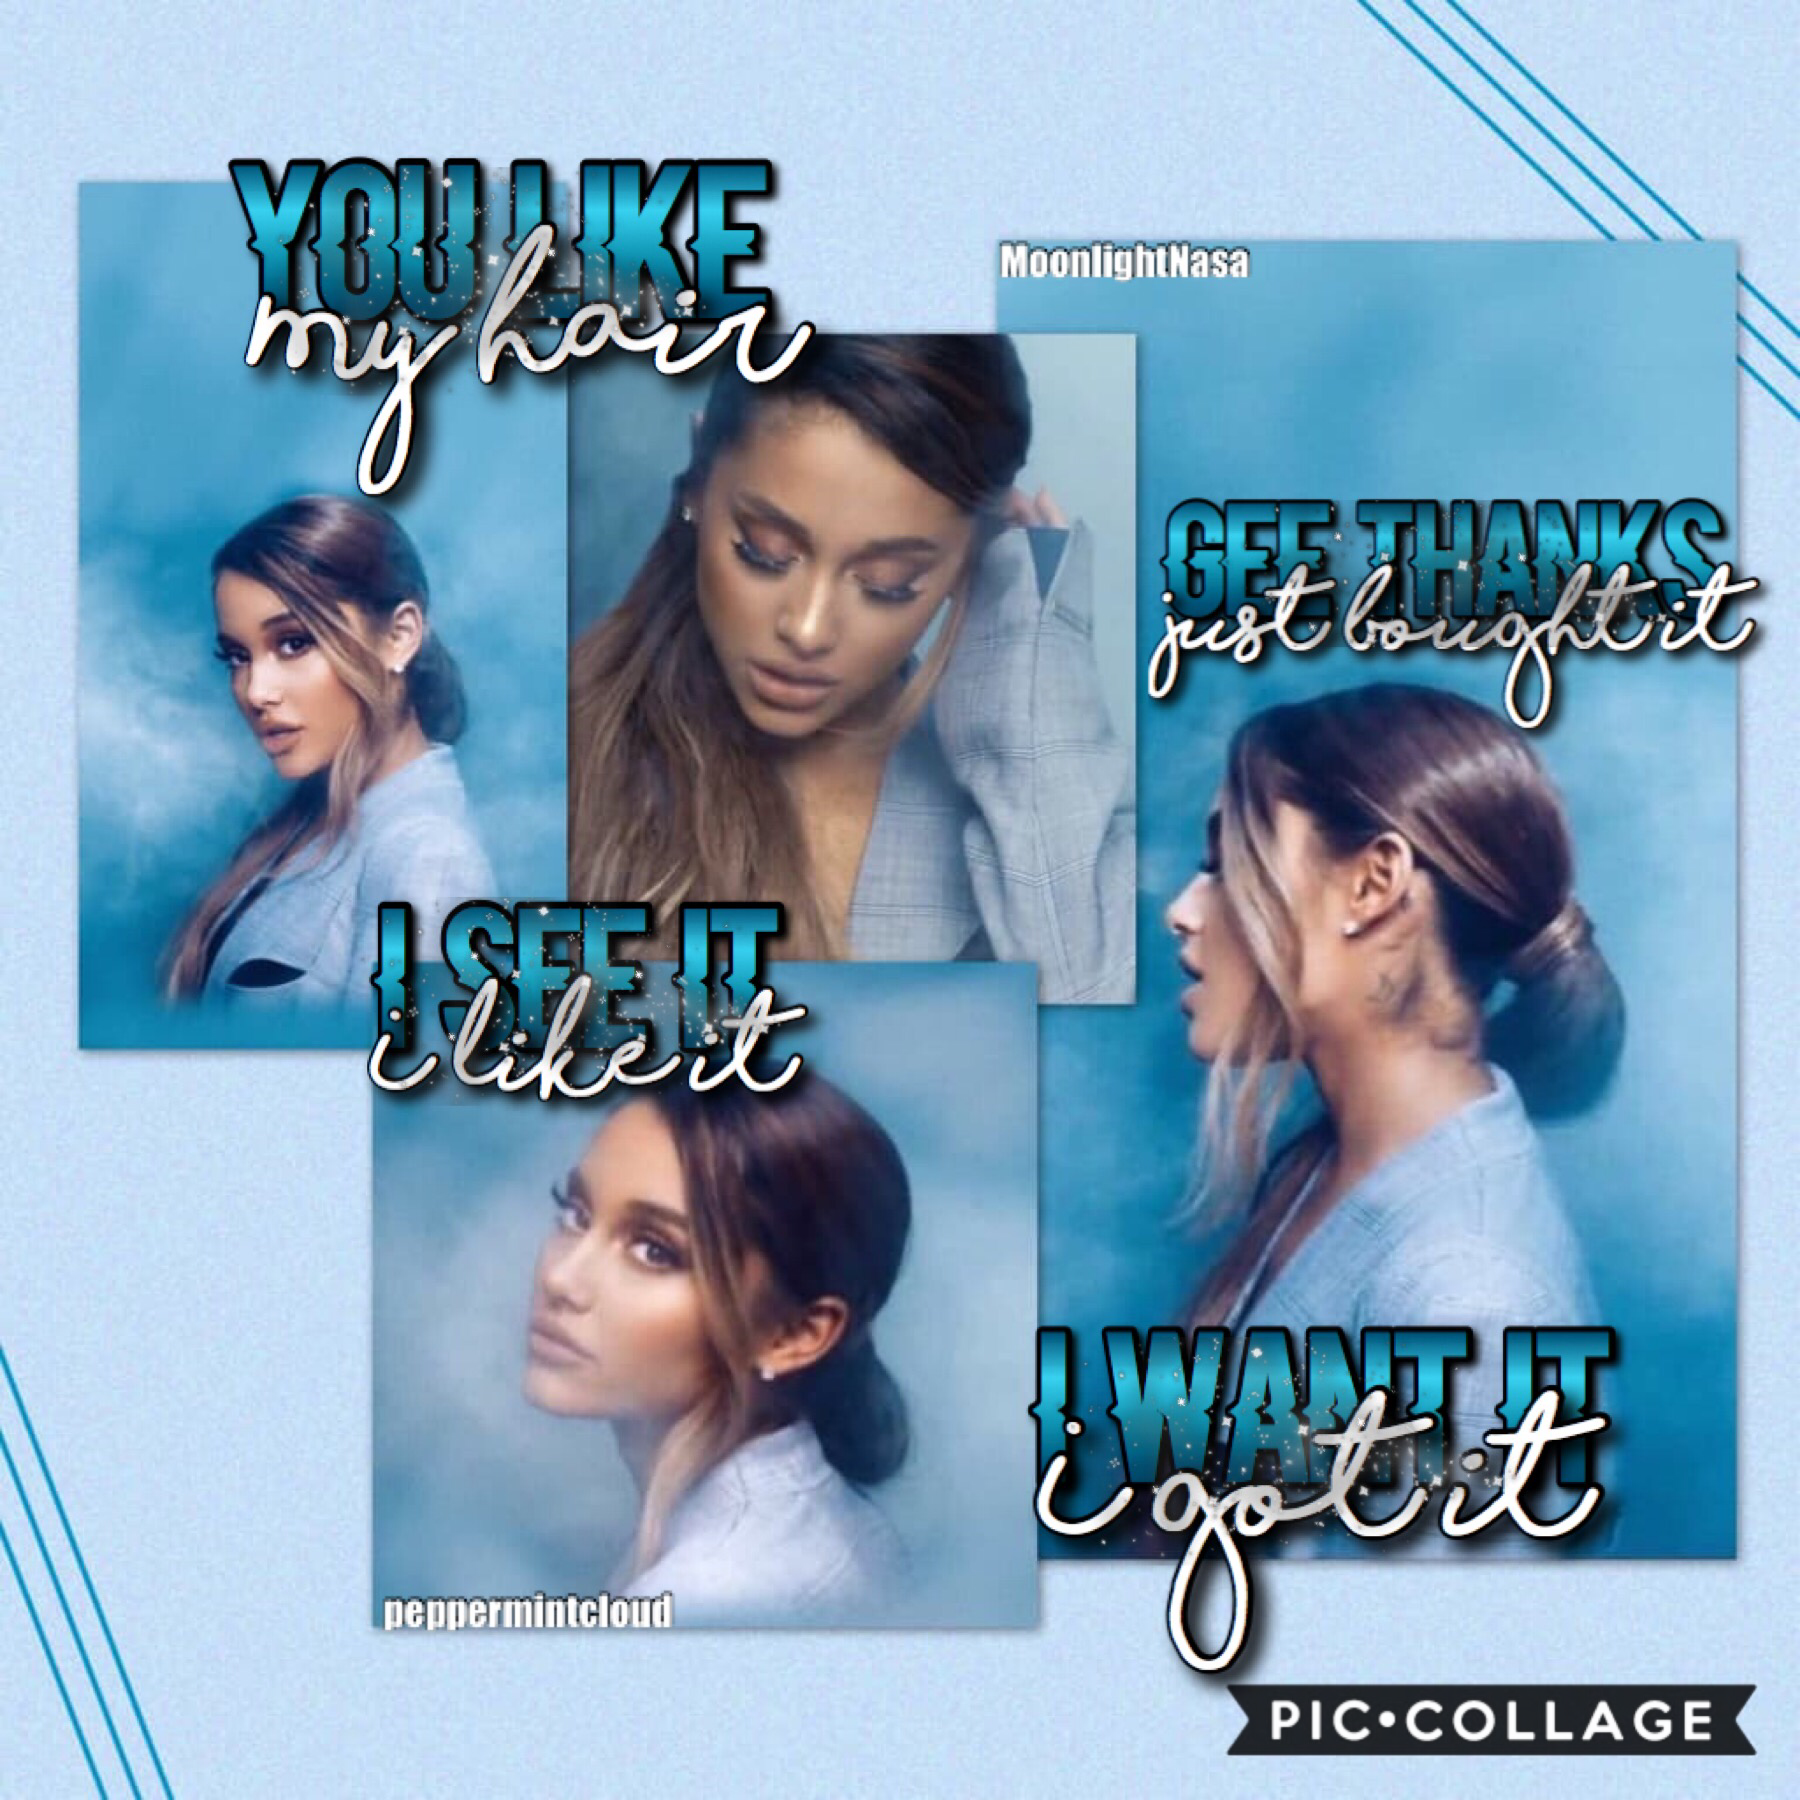 Collab with the talented....

MoonlightNasa!! She did the AMAZING background and I did text!☺️ Go follow this beautiful soul💗
aotd: who is your favorite singer? Ummmm probably Ari 😂 
Idk there are some pretty talented singers out there!